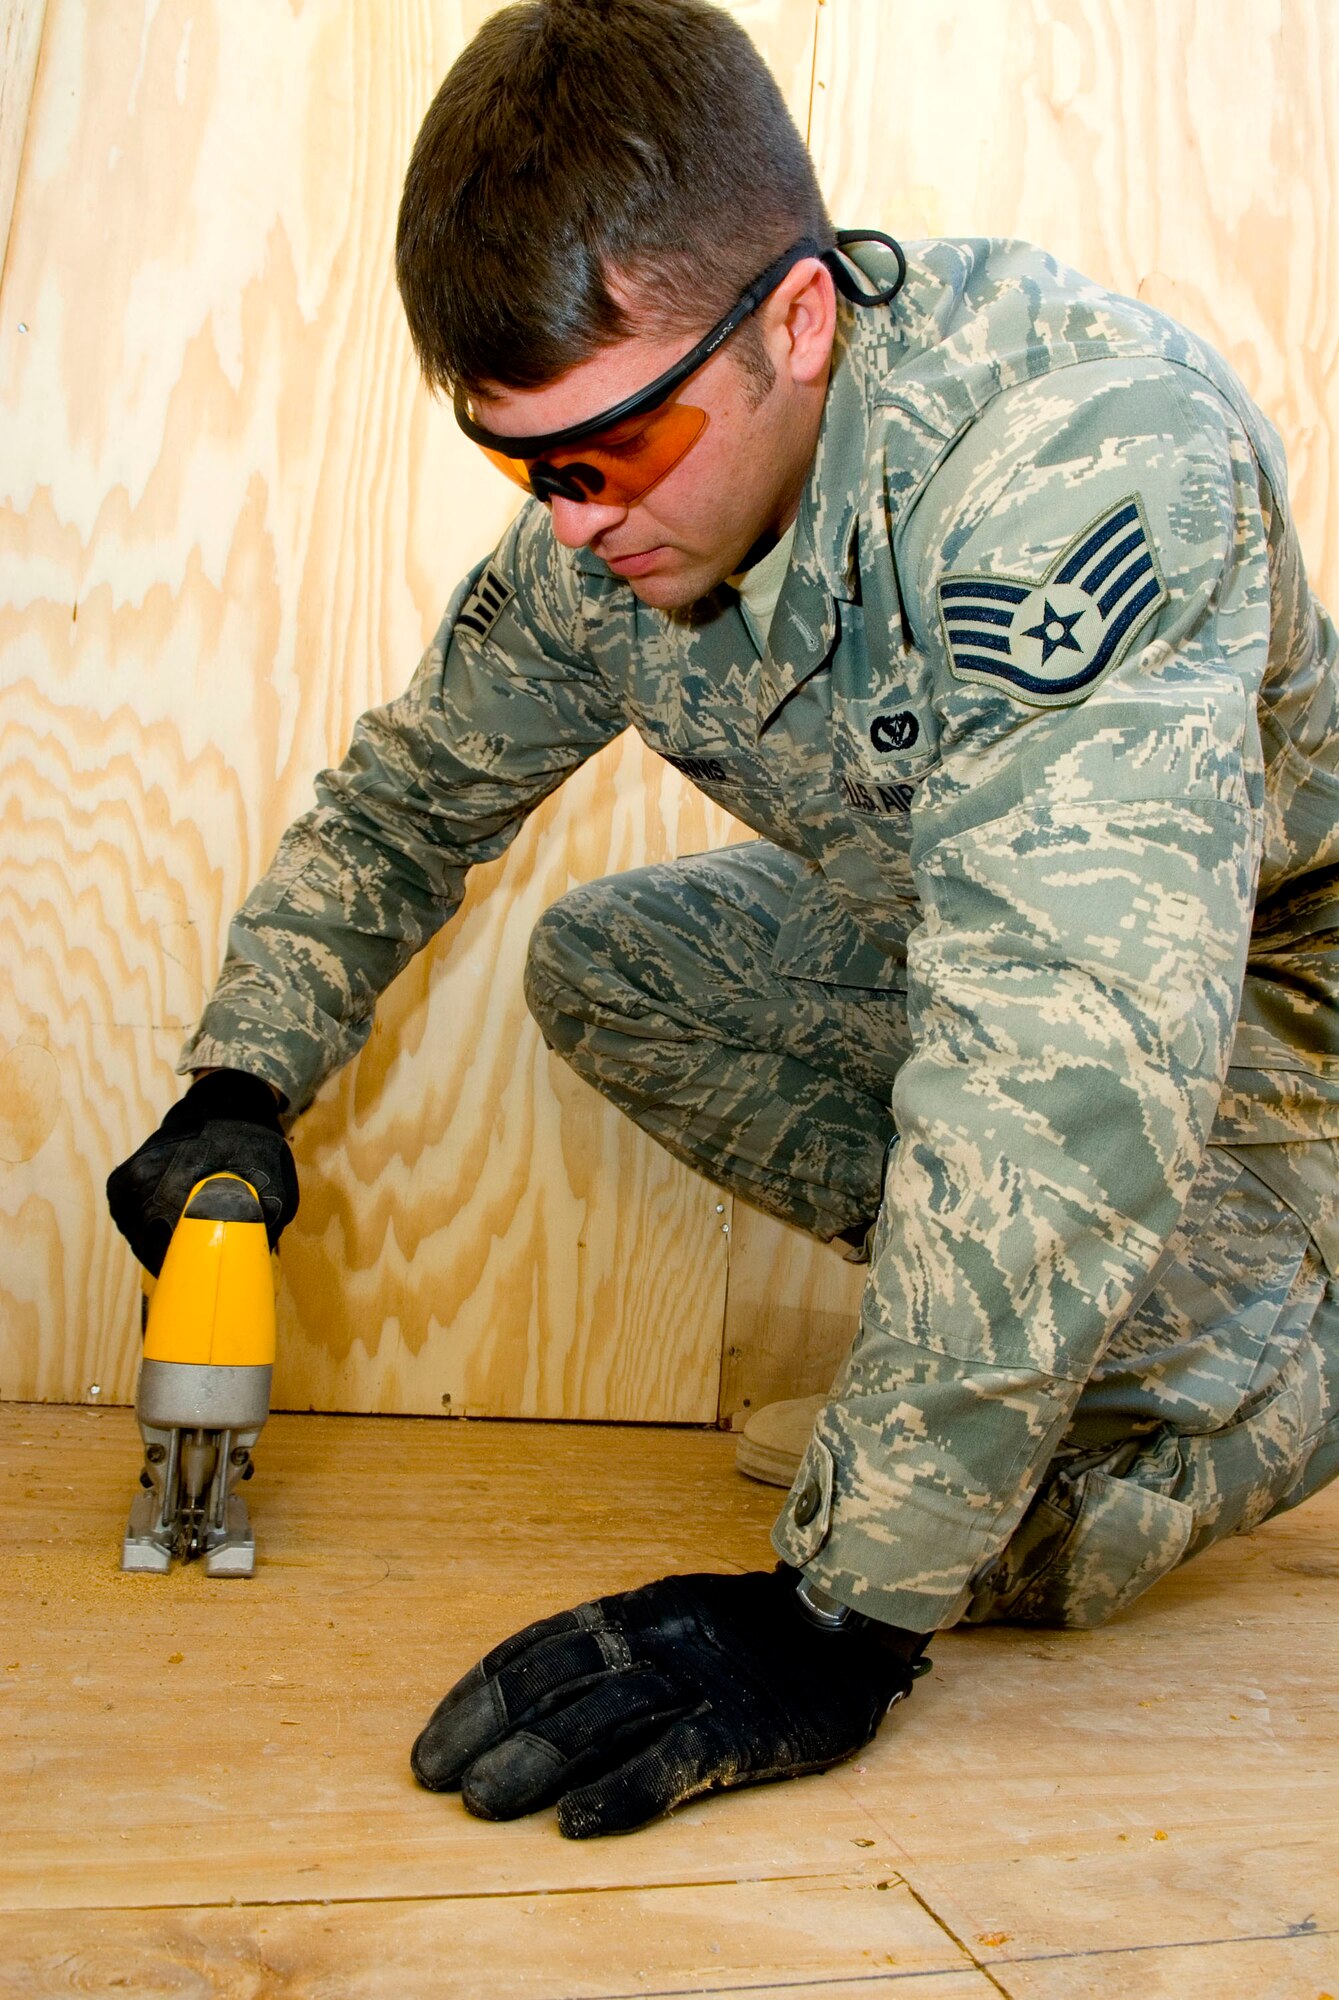 Staff Sgt. Caleb Dennis cuts a hole into a shower latrine unit Jan. 15 at Balad Air Base, Iraq. The hole will be used to install drainage pipes in the unit. Sergeant Dennis, a 732nd Expeditionary Civil Engineer Squadron utility technician, is deployed from Kadena Air Base, Japan. (U.S. Air Force photo/Staff Sgt. Joshua Garcia)
